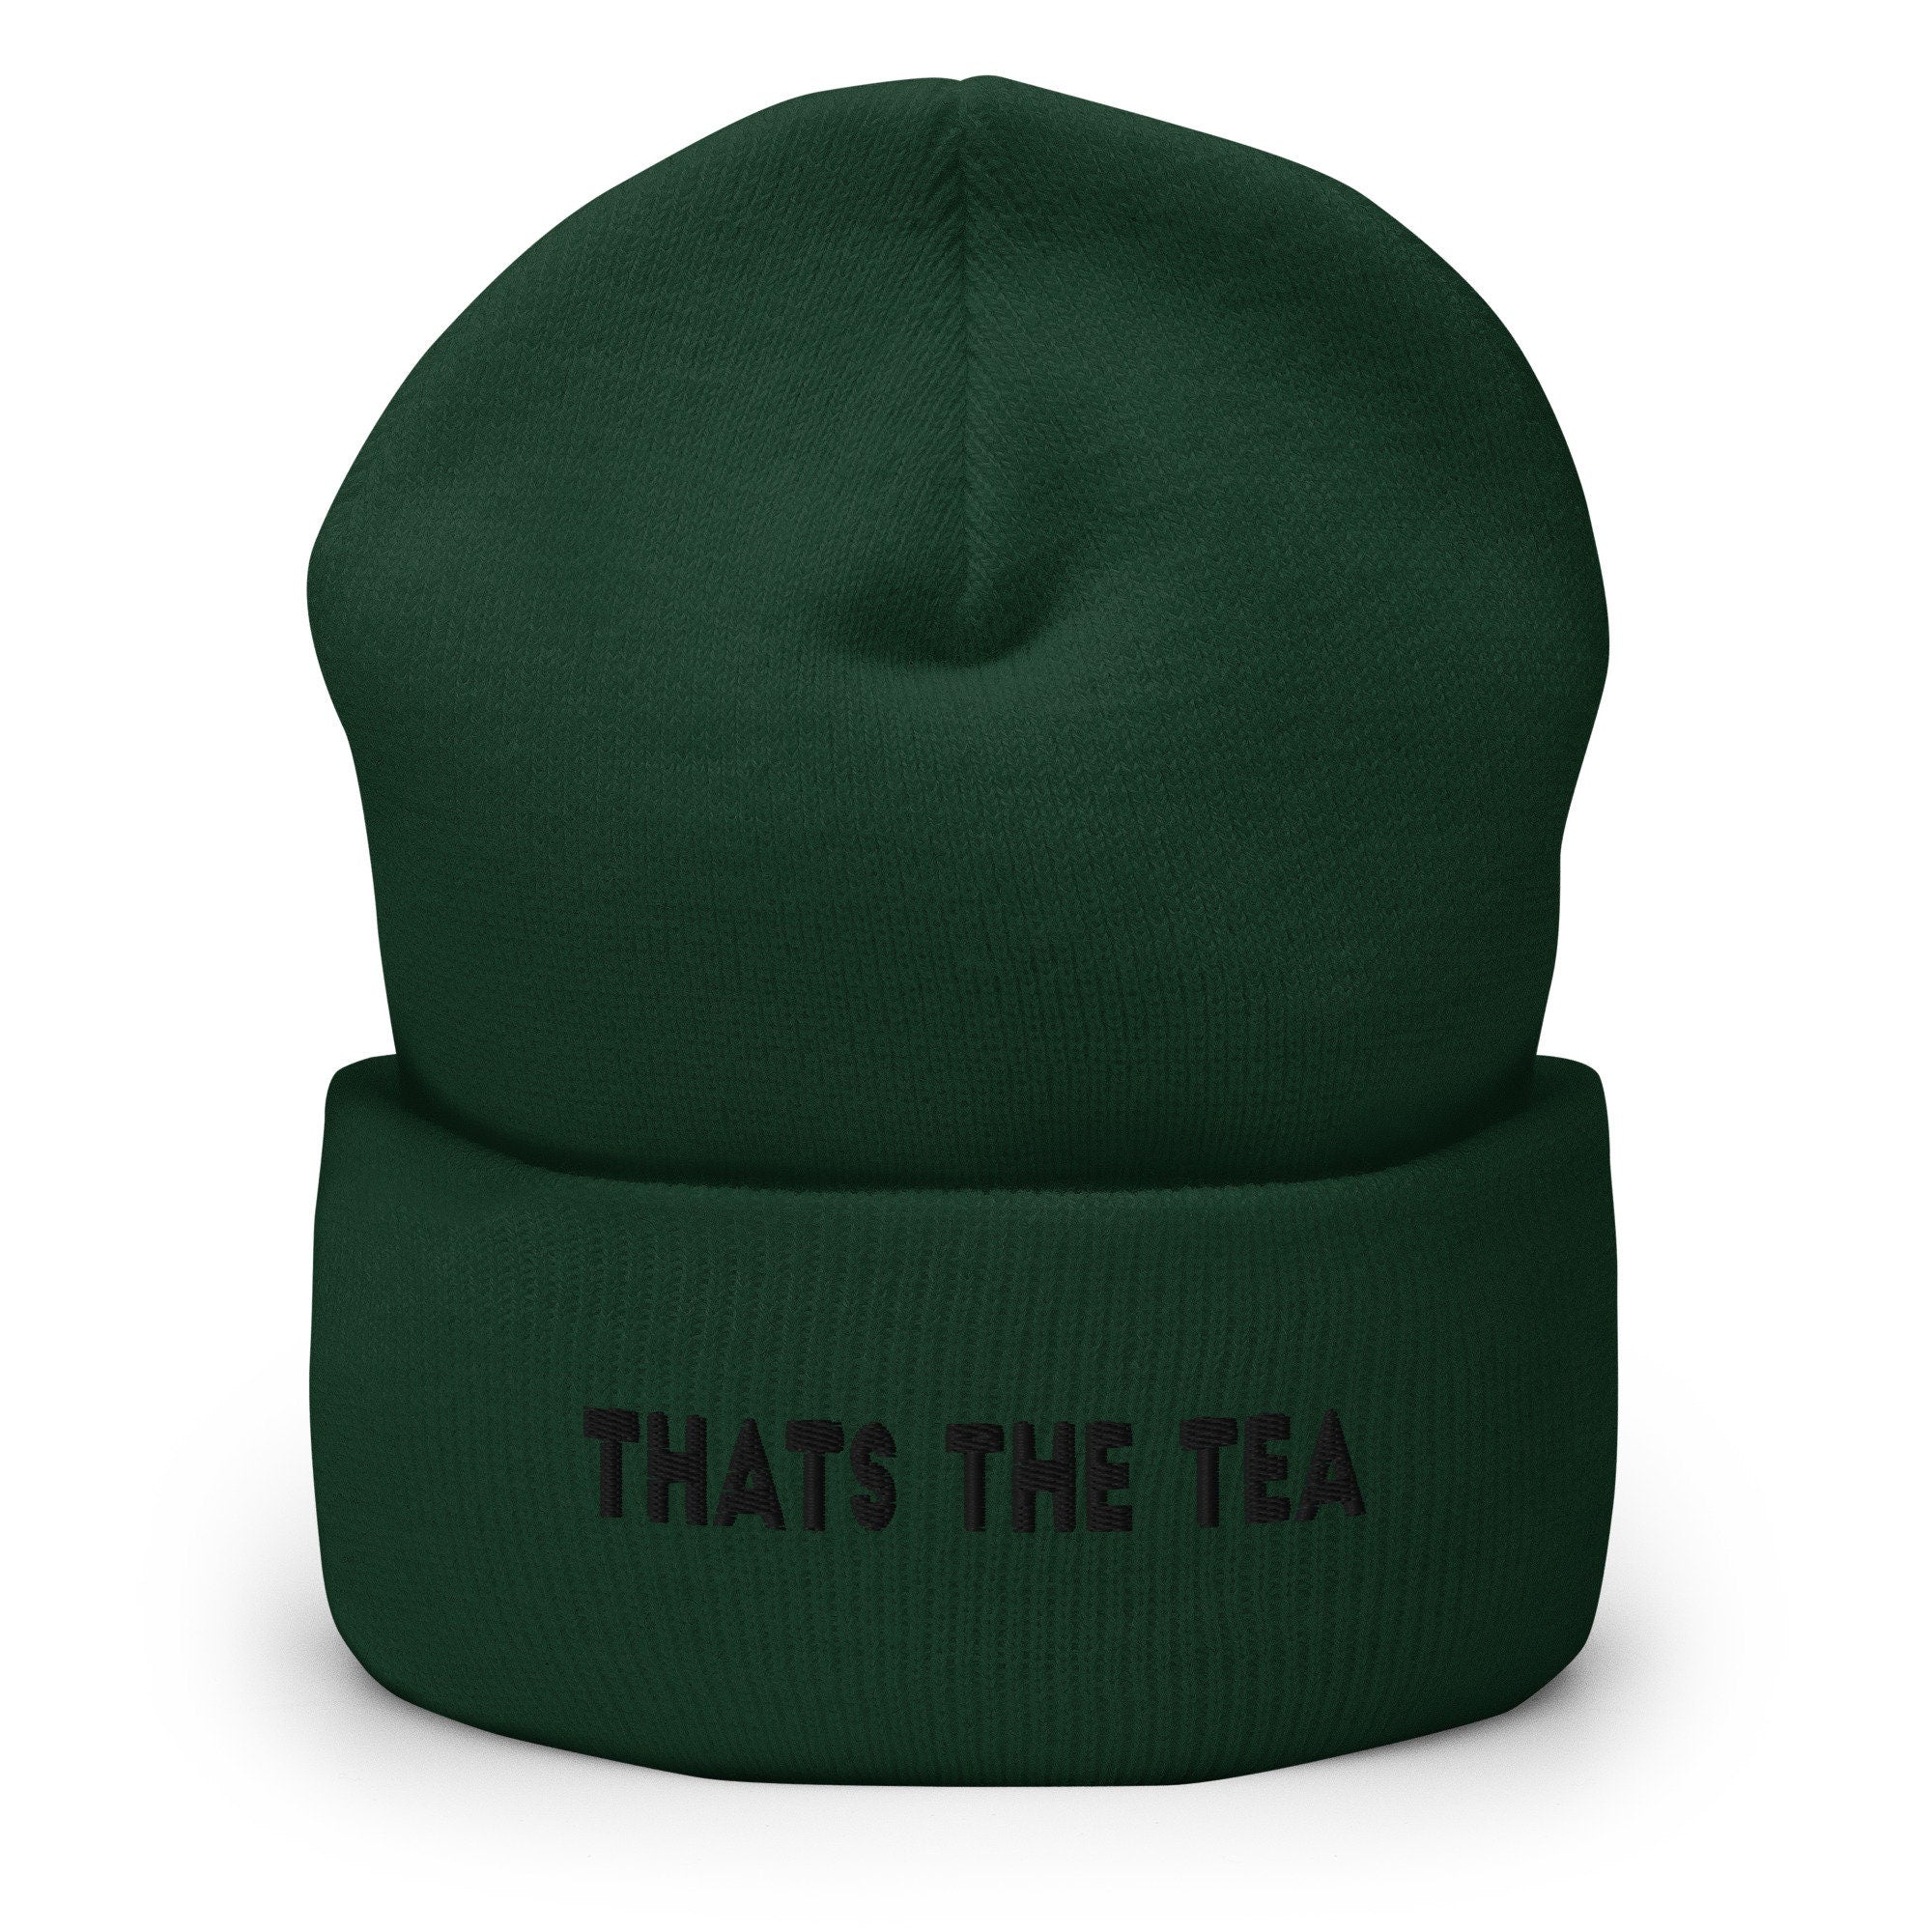 That's The Tea Embroidered Beanie, Handmade Cuffed Knit Unisex Slouchy Adult Winter Hat Cap Gift